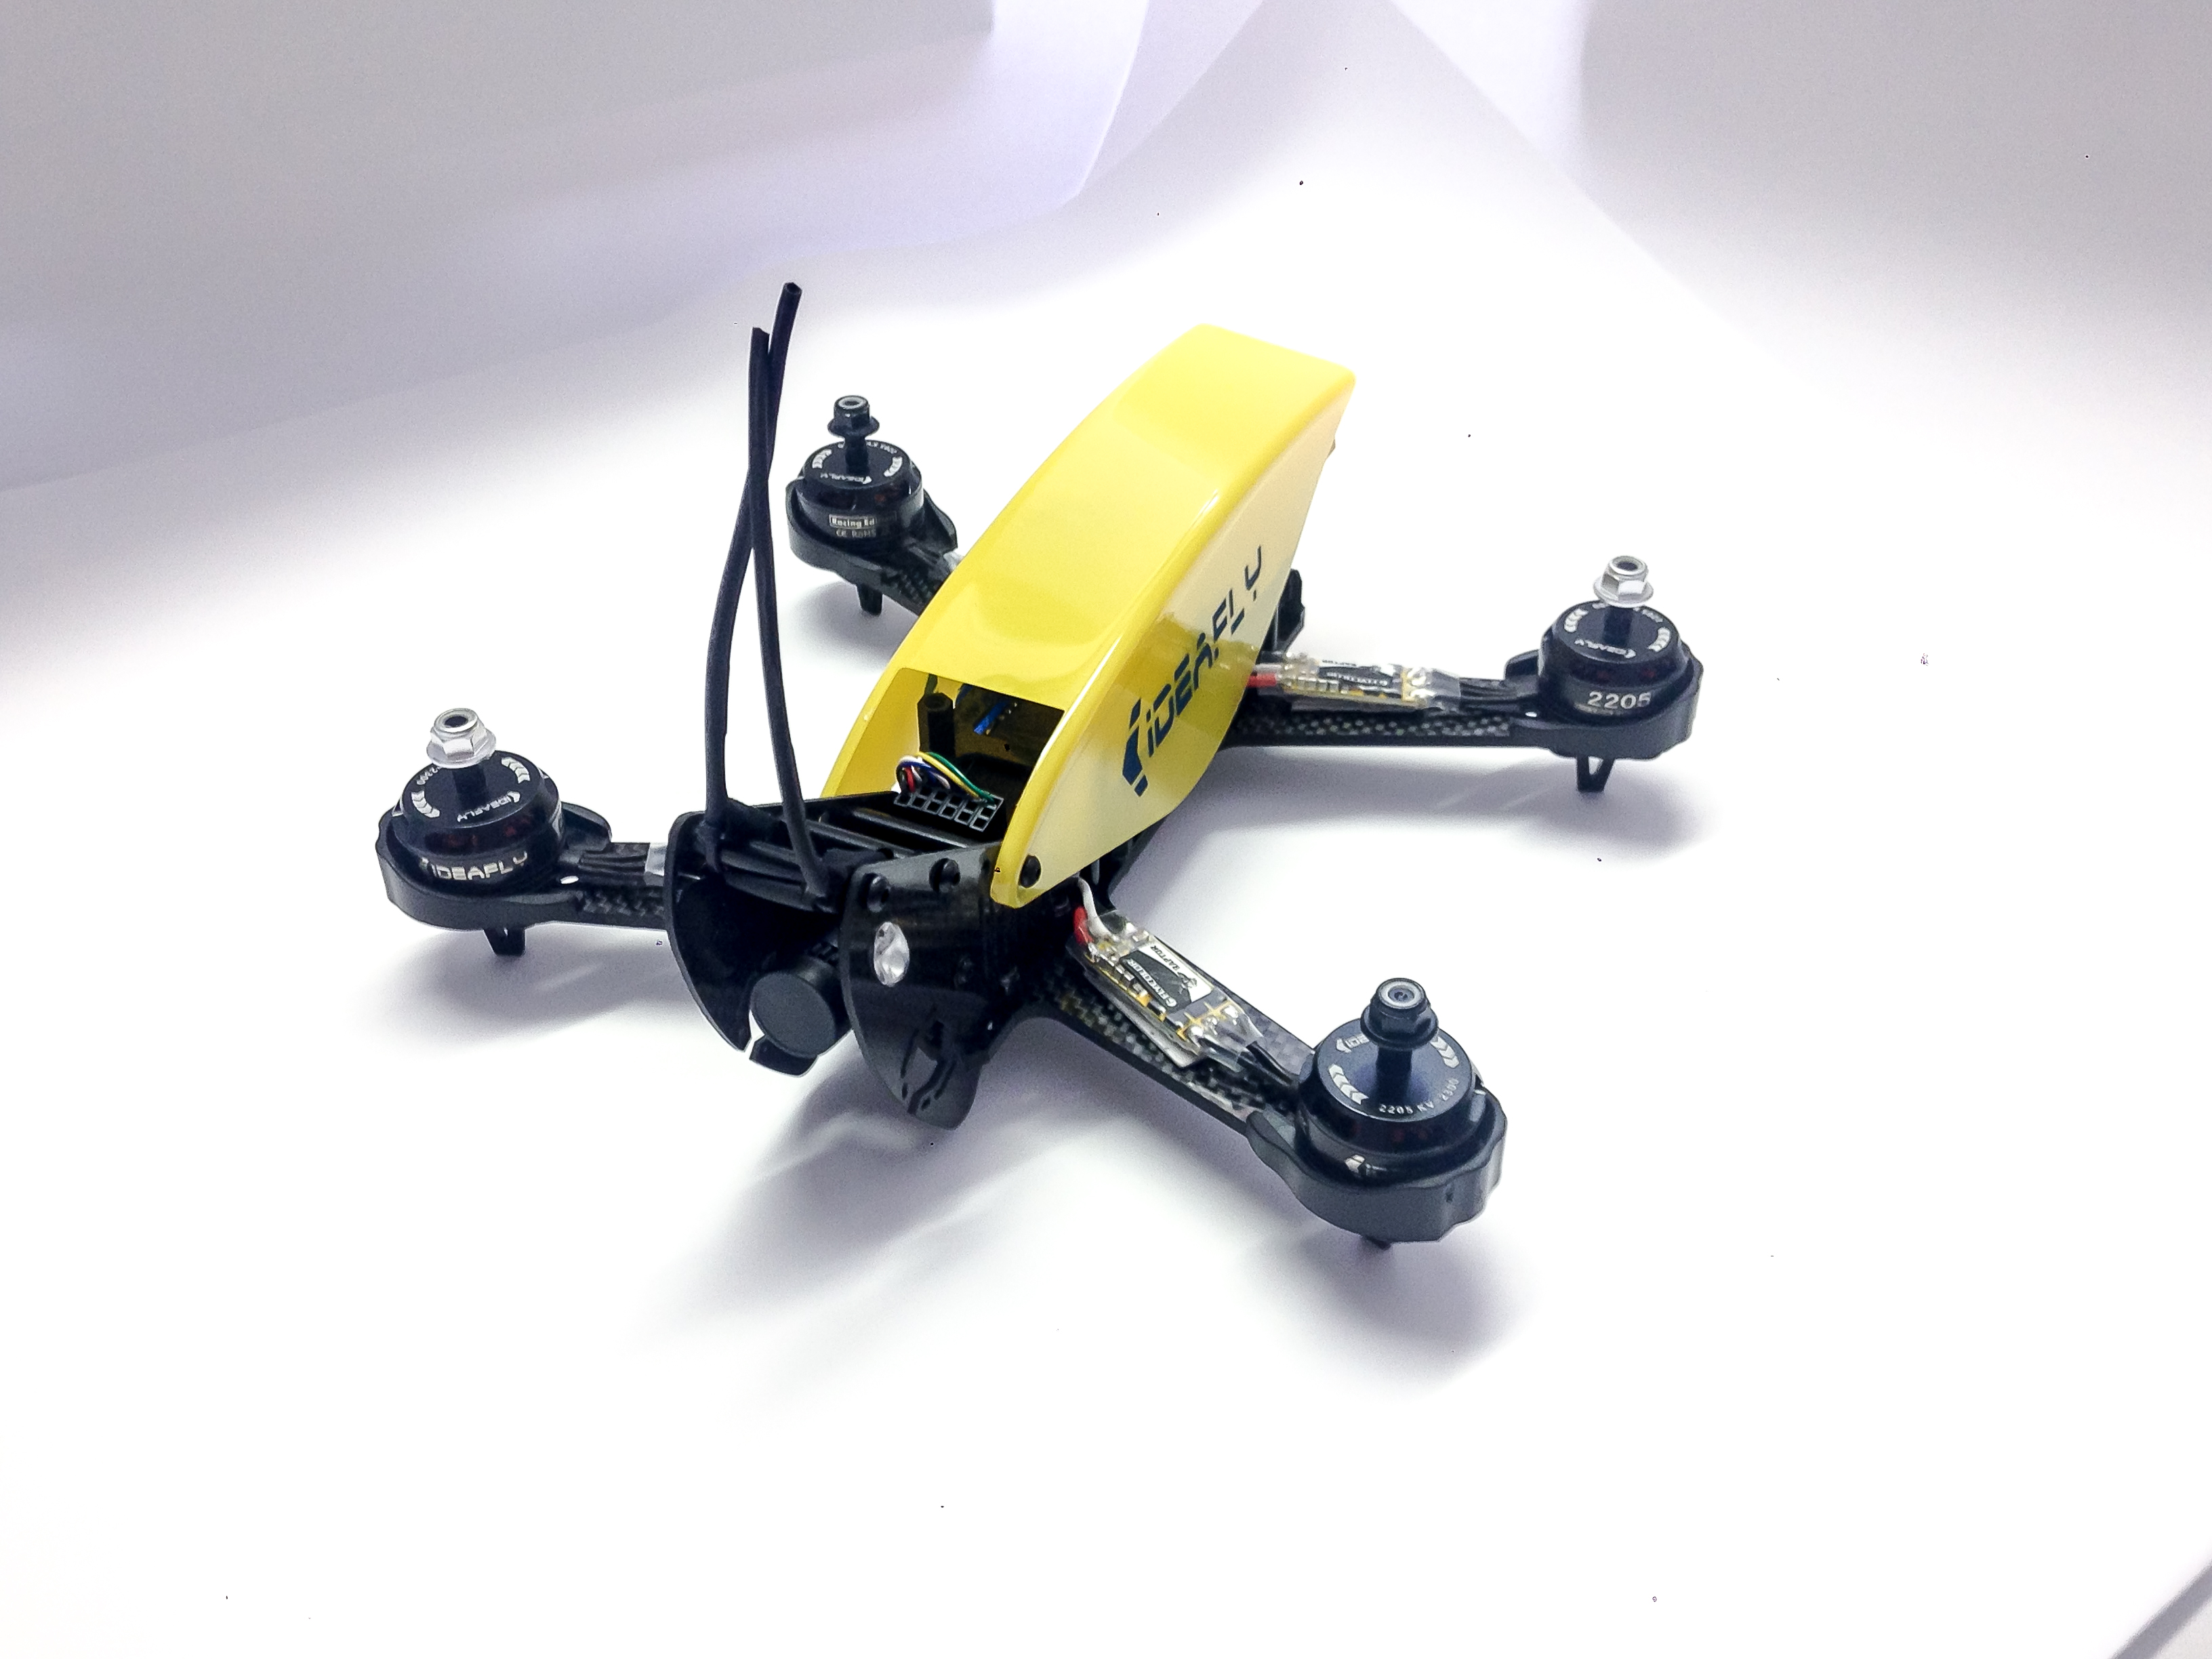 Ideafly Grasshopper F210 Racing RC Quadcopter 